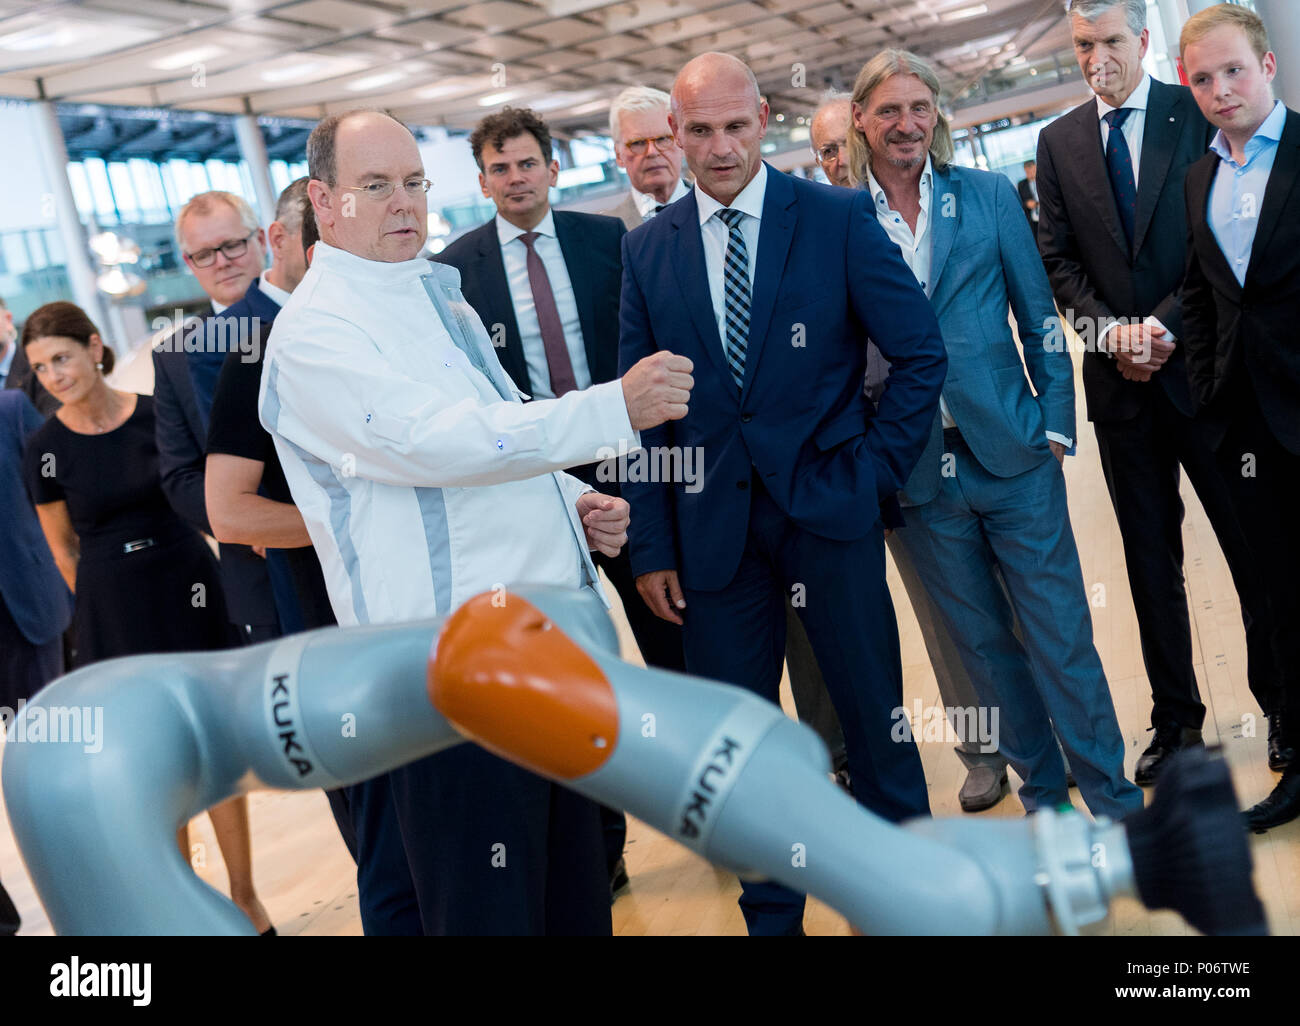 08 June 2018, Germany, Dresden: Albert II, Prince of Monaco (wearing white  jacket) controls the arm of a Kuka robot using a jacket fitted with  sensors, during his visit to the Volkswagen